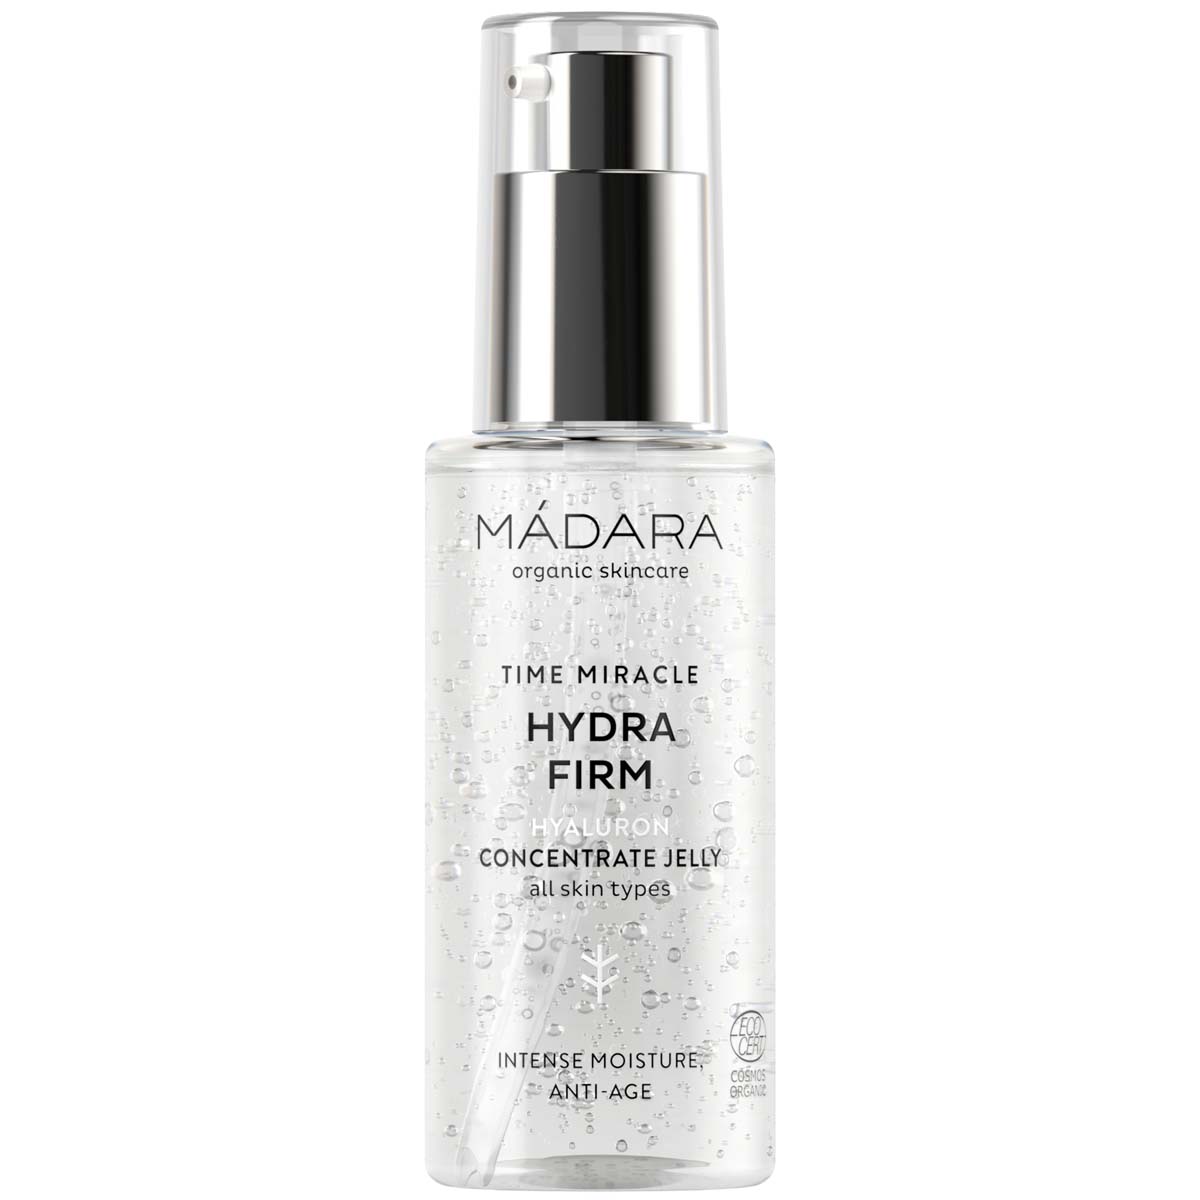 Madara Time Miracle Hydra Firm Hyaluron Concentrate Jelly 75Ml